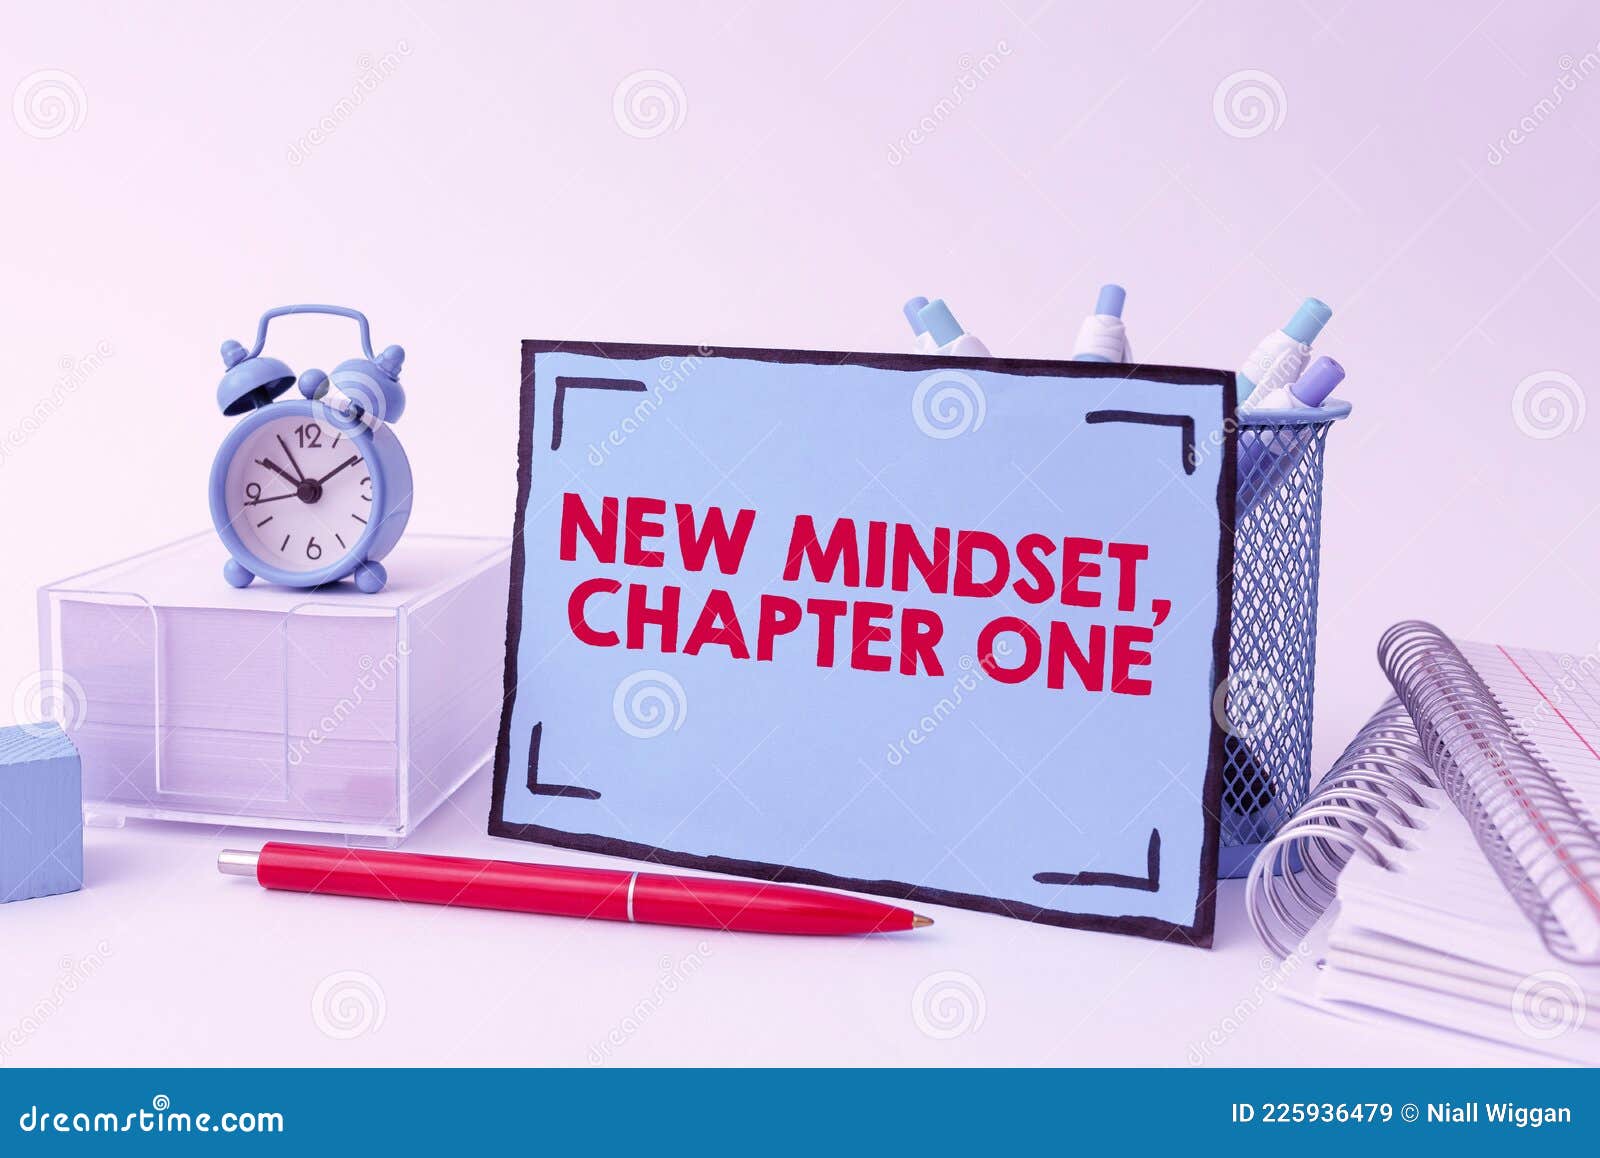 text showing inspiration new mindset, chapter one. business idea change on attitudes and thinking improve hard work tidy